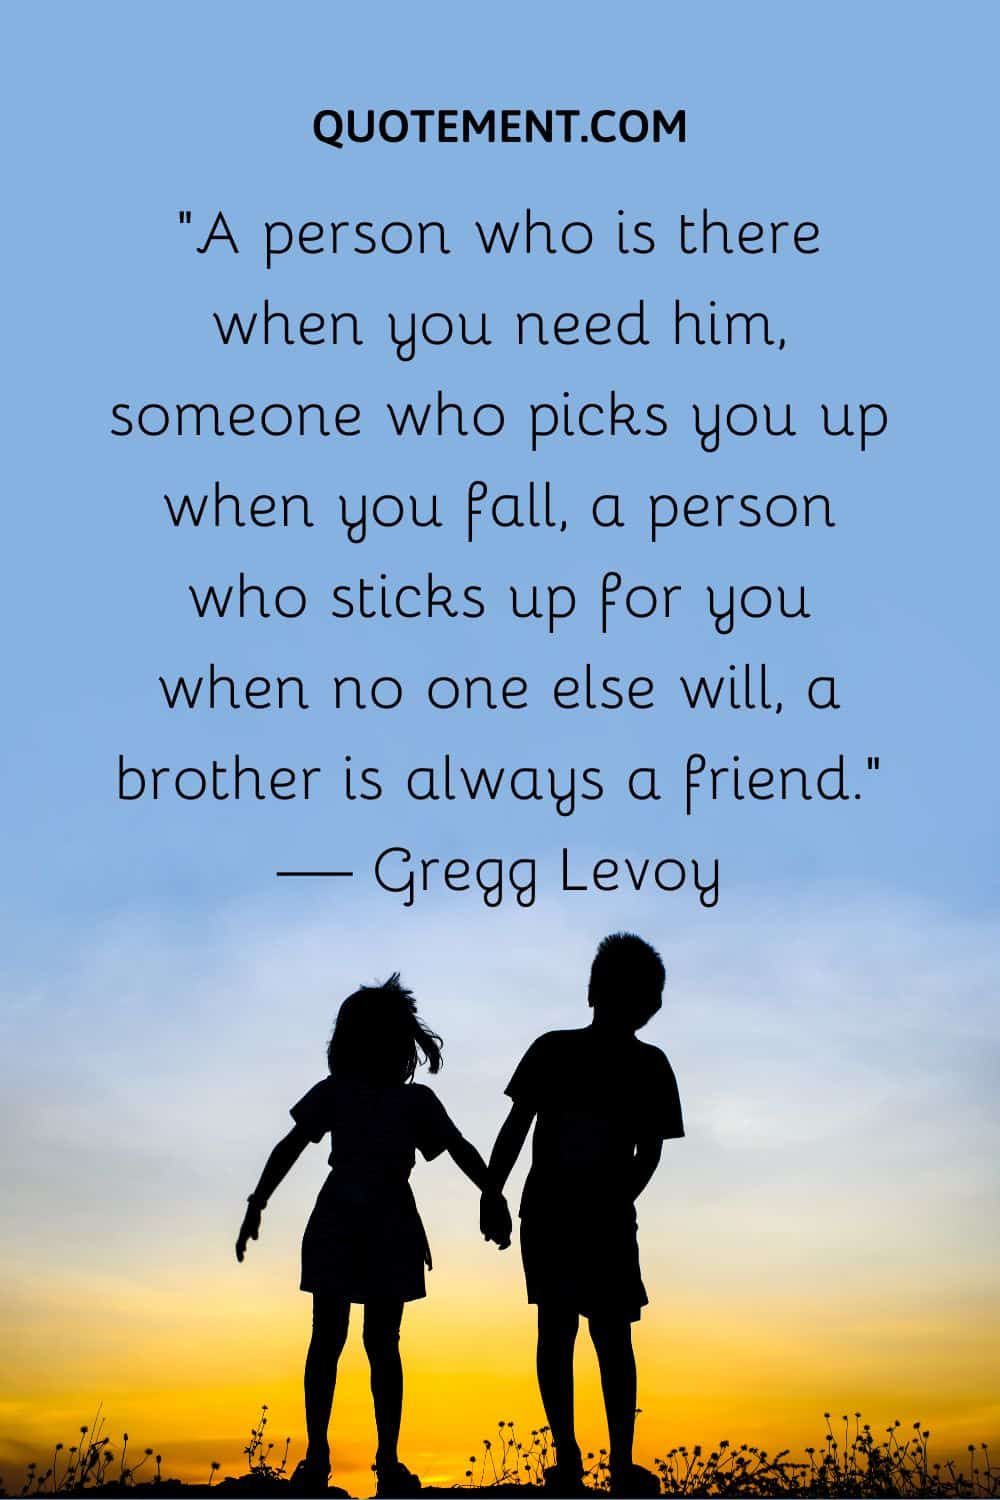 “A person who is there when you need him, someone who picks you up when you fall, a person who sticks up for you when no one else will, a brother is always a friend.”